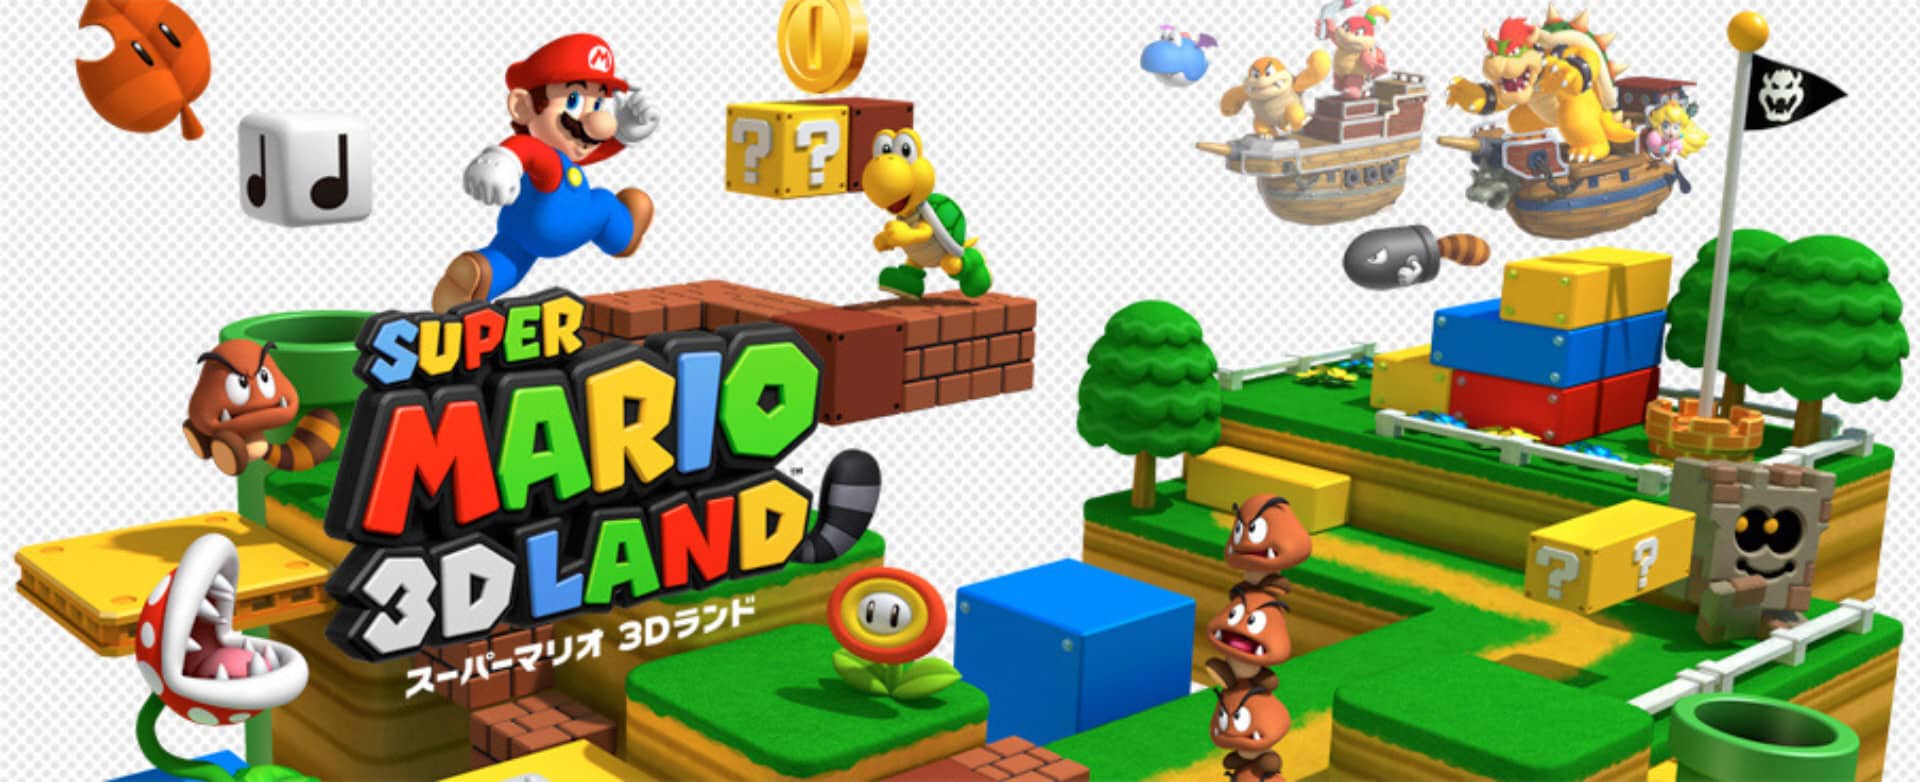 Super Mario 3D Land Wallpaper – Cast of Characters and Enemies